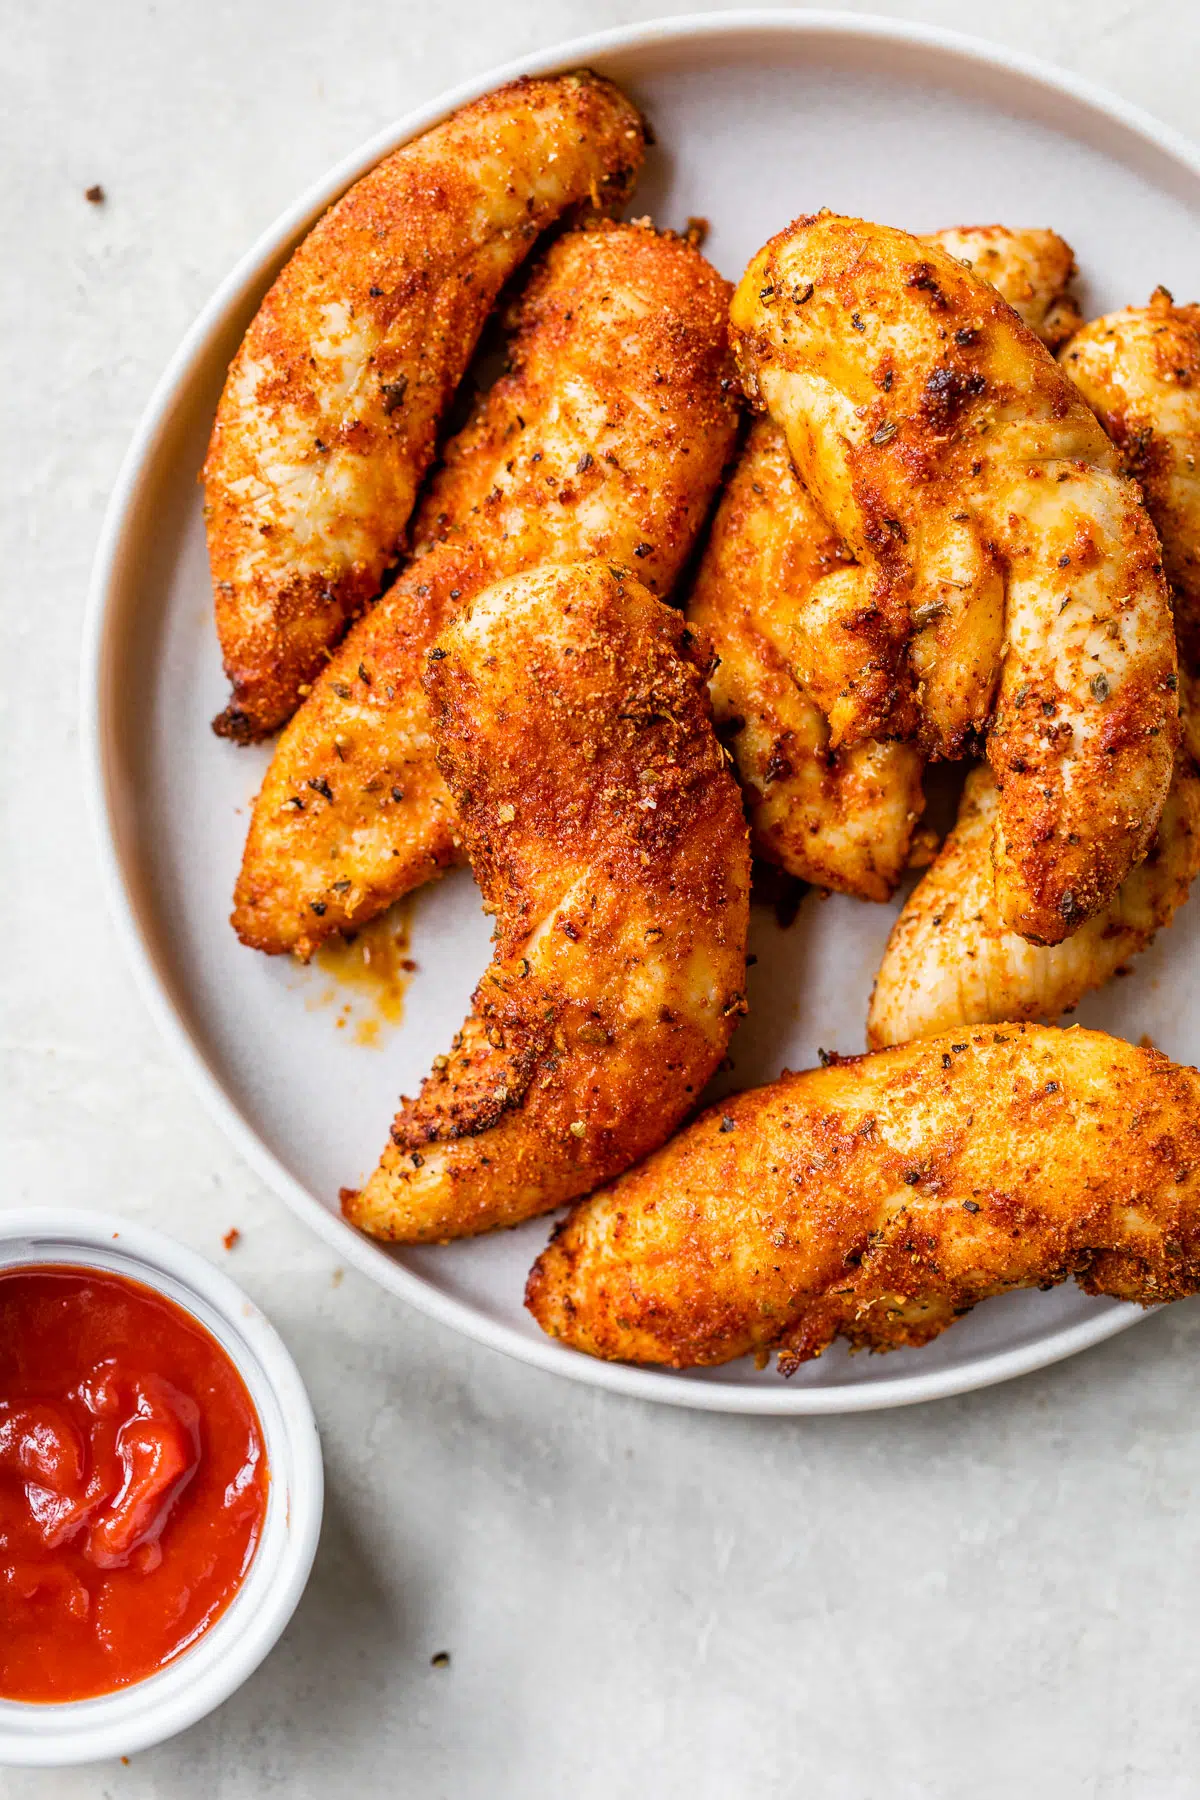 Chicken wings on a plate with ketchup on the side, perfect for chicken tender recipes.